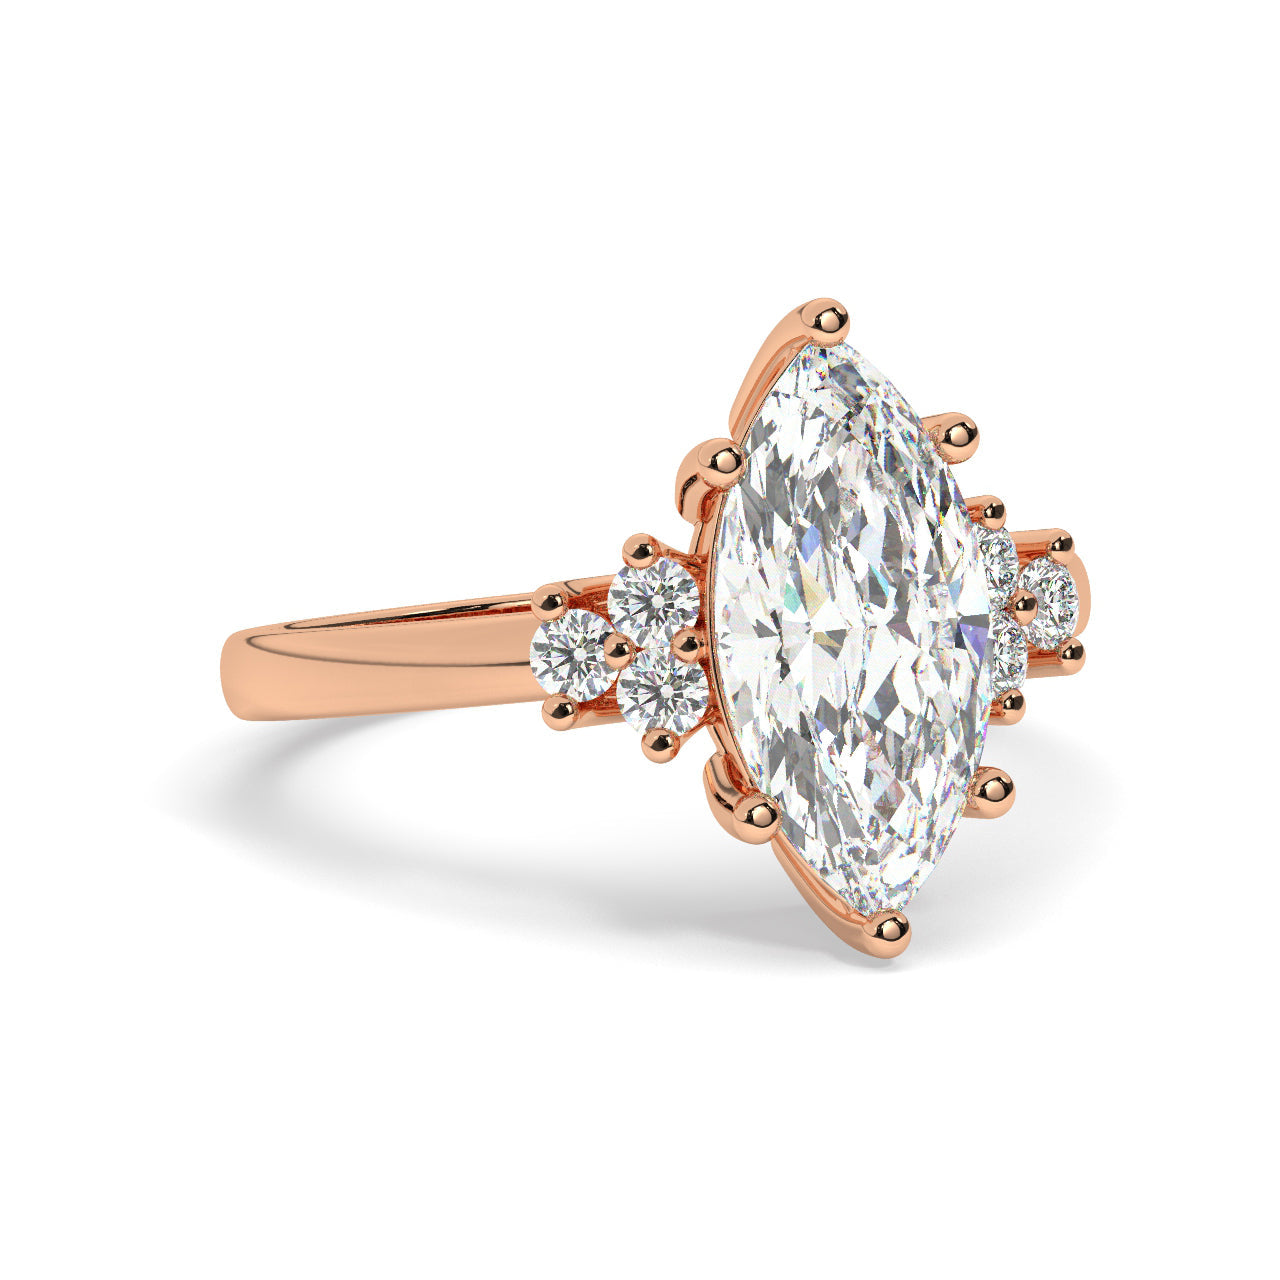 Rose Gold Marquis Cut Engagement Ring Accompanied by Round Stones - Rotated View